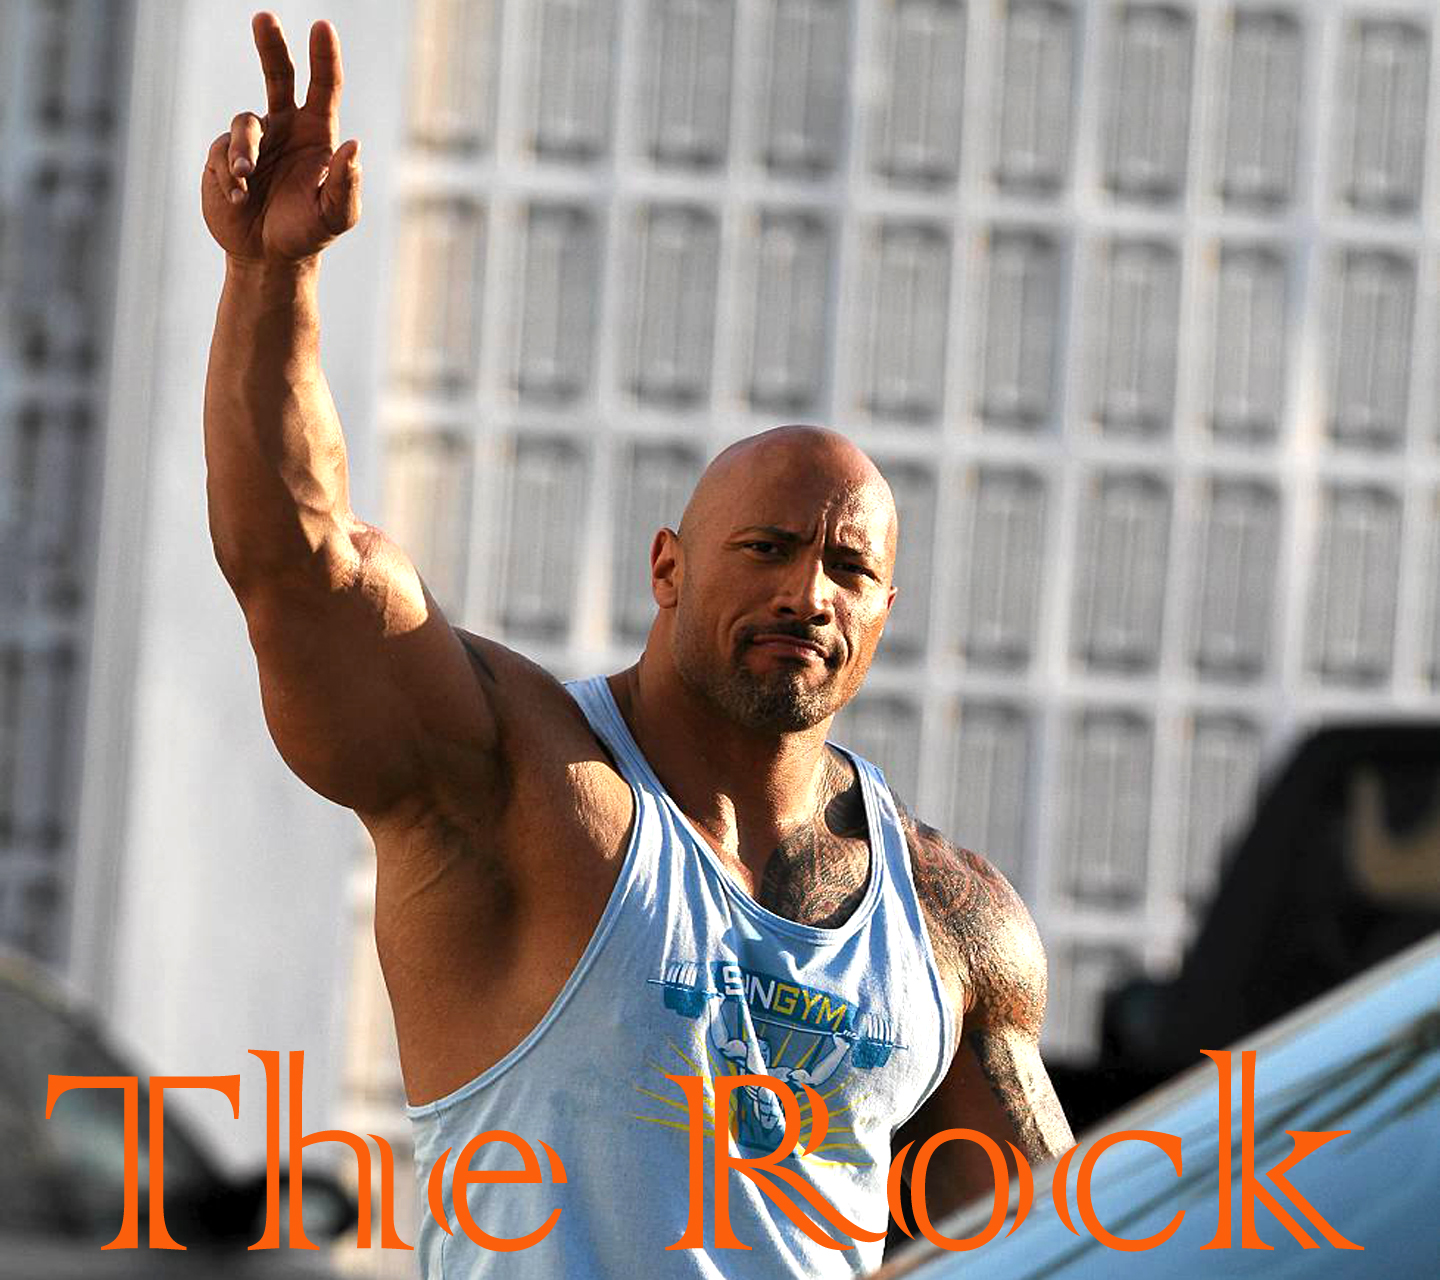 wwe the rock photos high resolution for mobile | Full HD Imagess